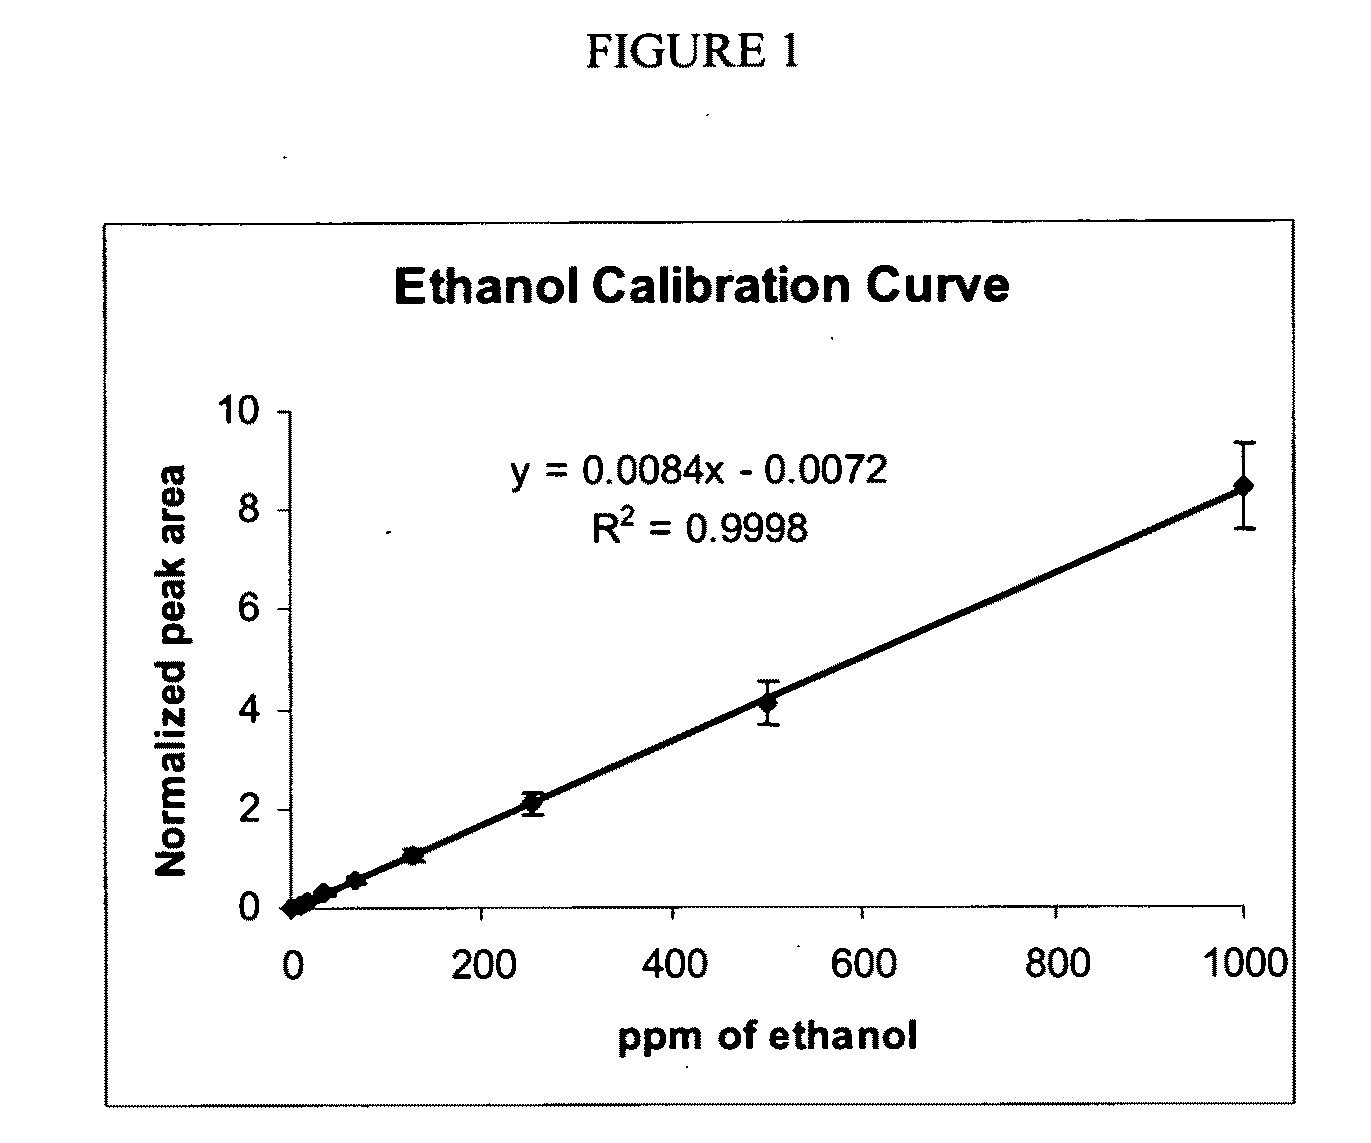 Methods for the production of ethanol